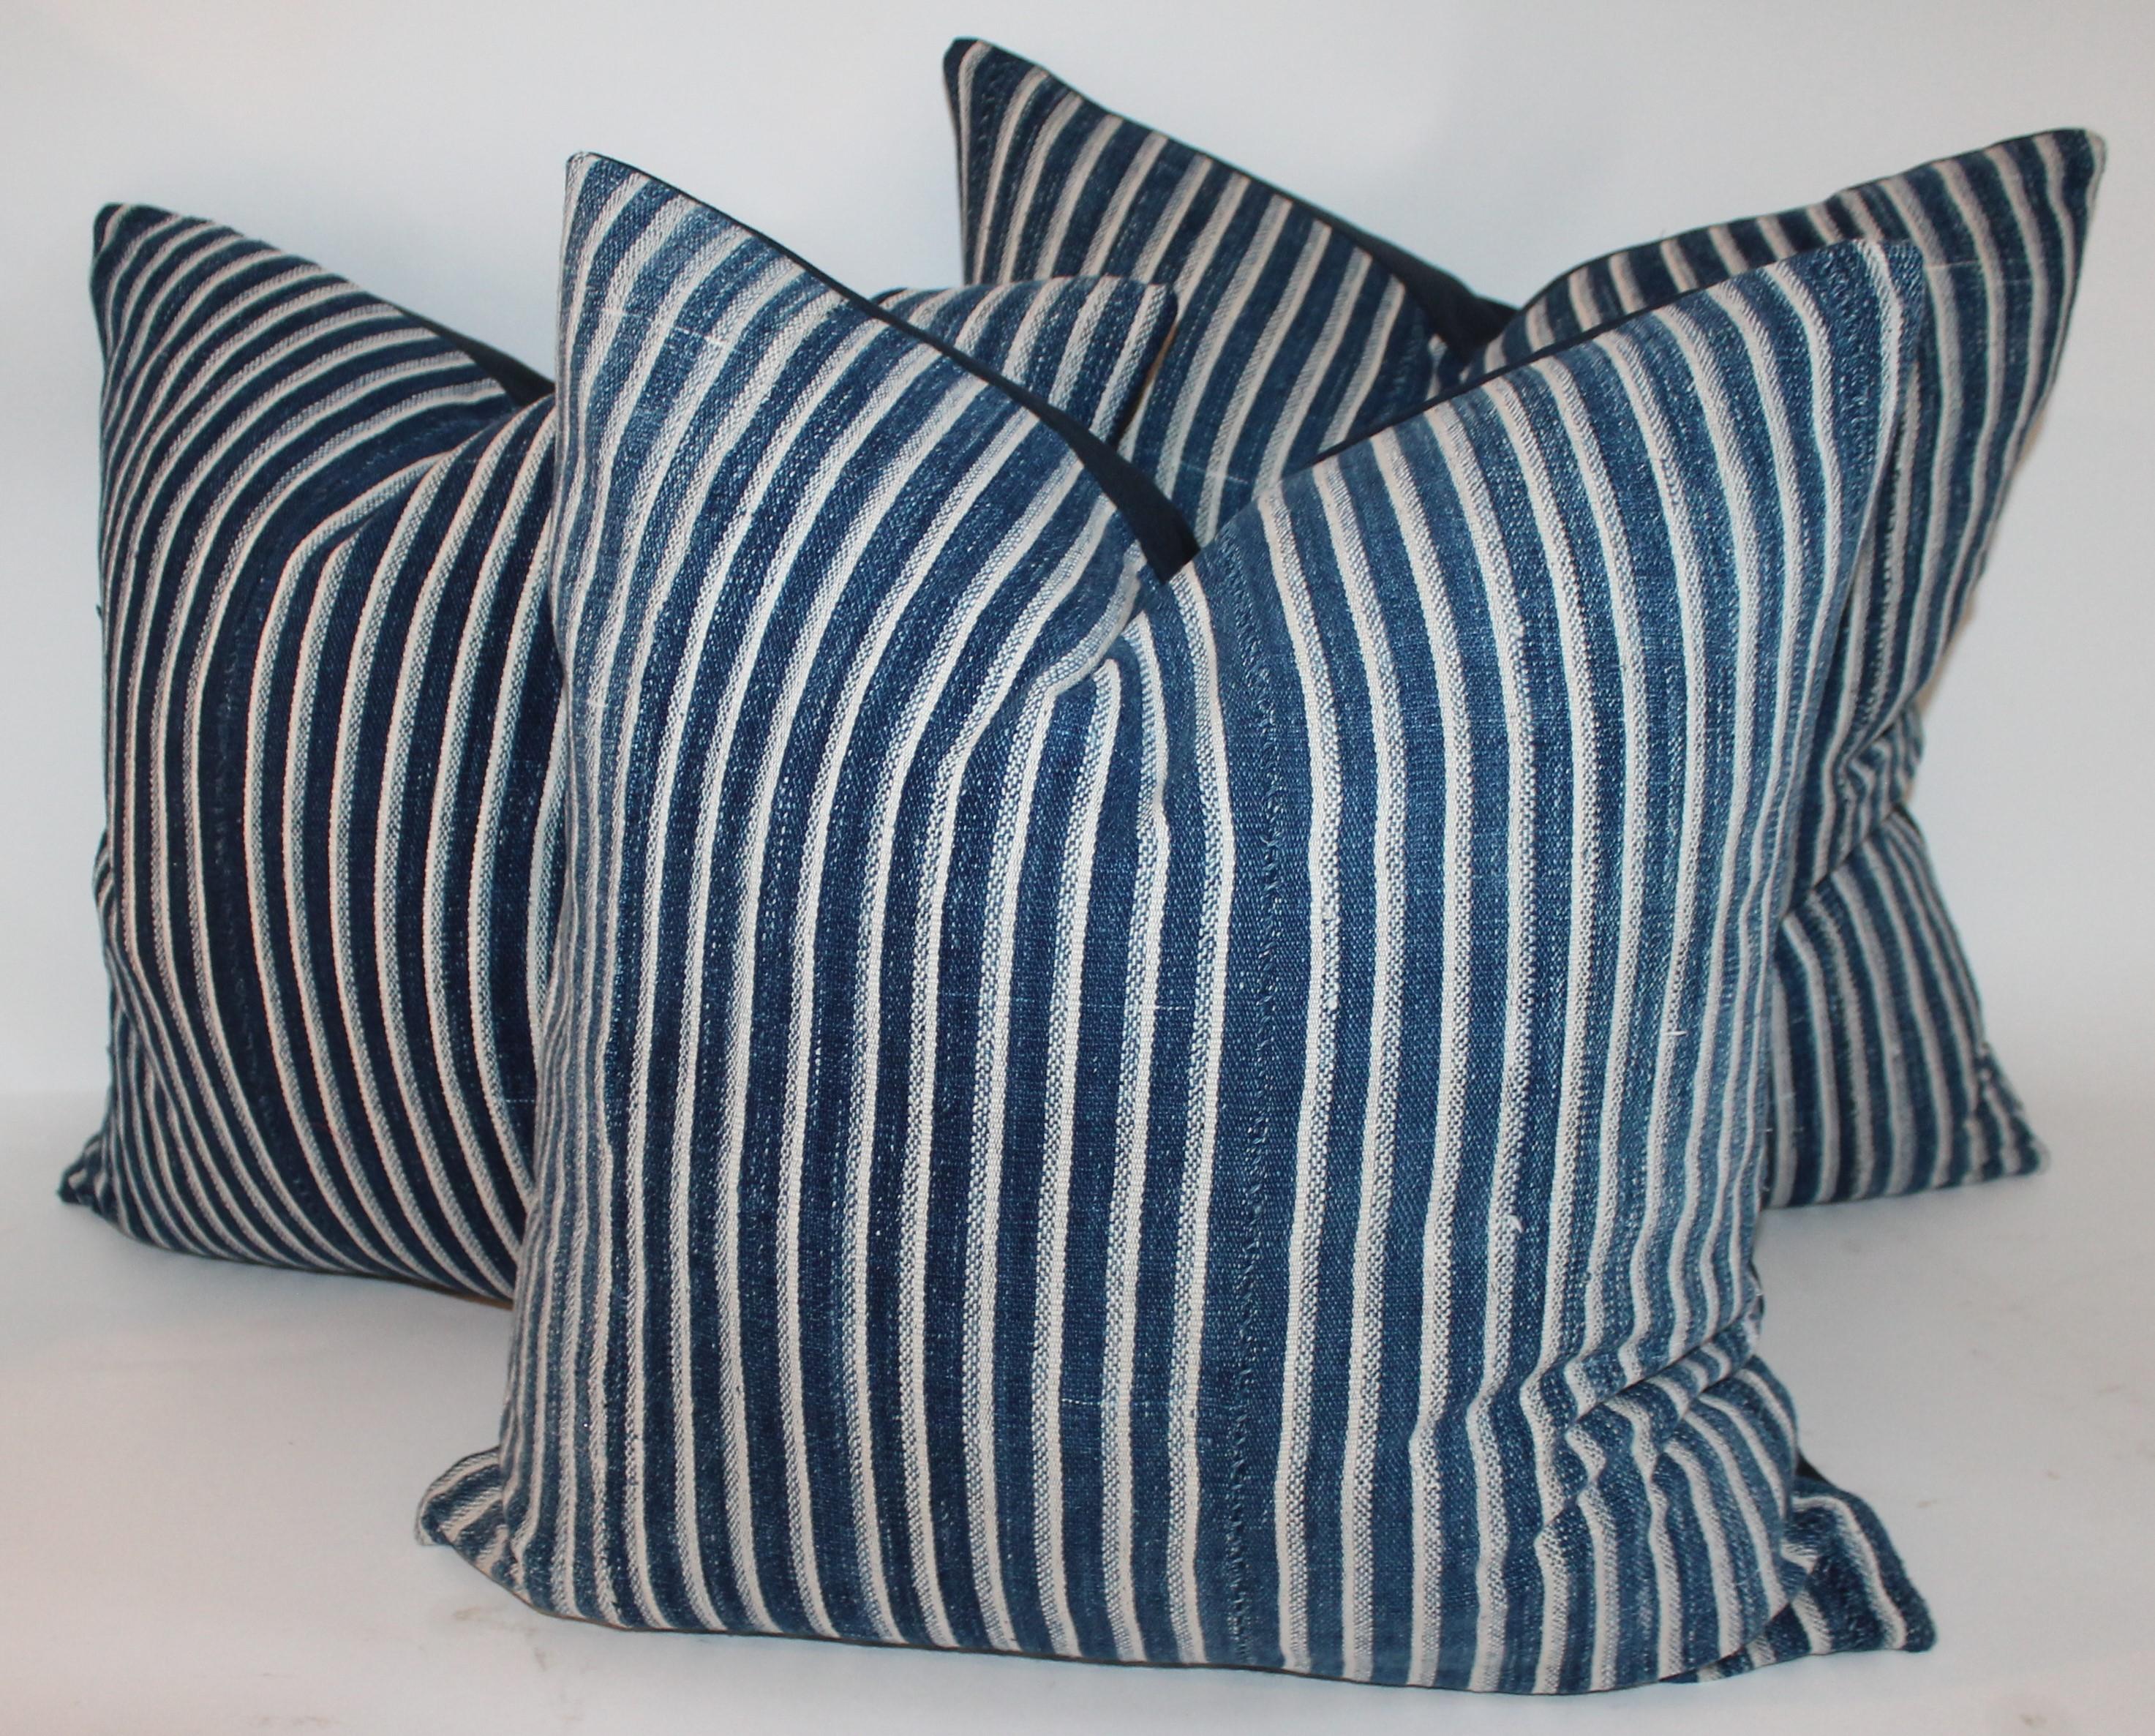 Collection of three deep blue striped linen ticking pillows. The backings are in dark blue cotton linen fabric. The inserts are down and feather fill.